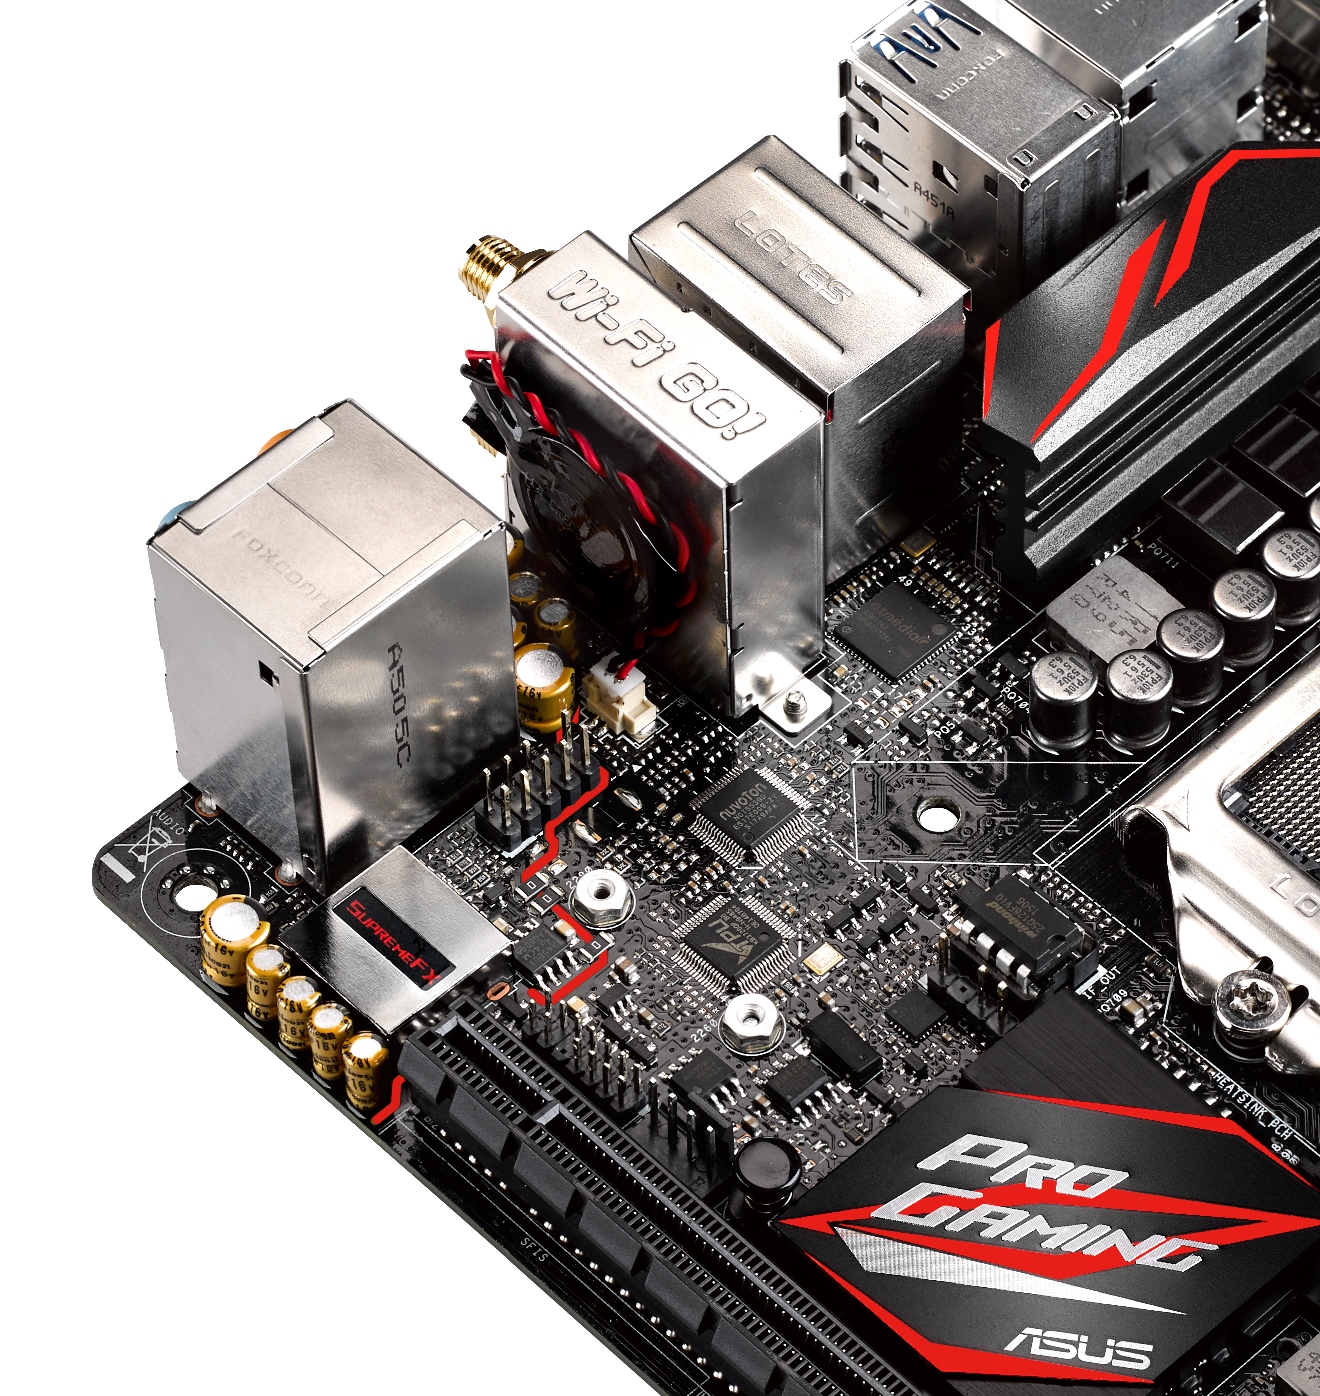 ASUS Announces Z170I Pro Gaming Motherboard View